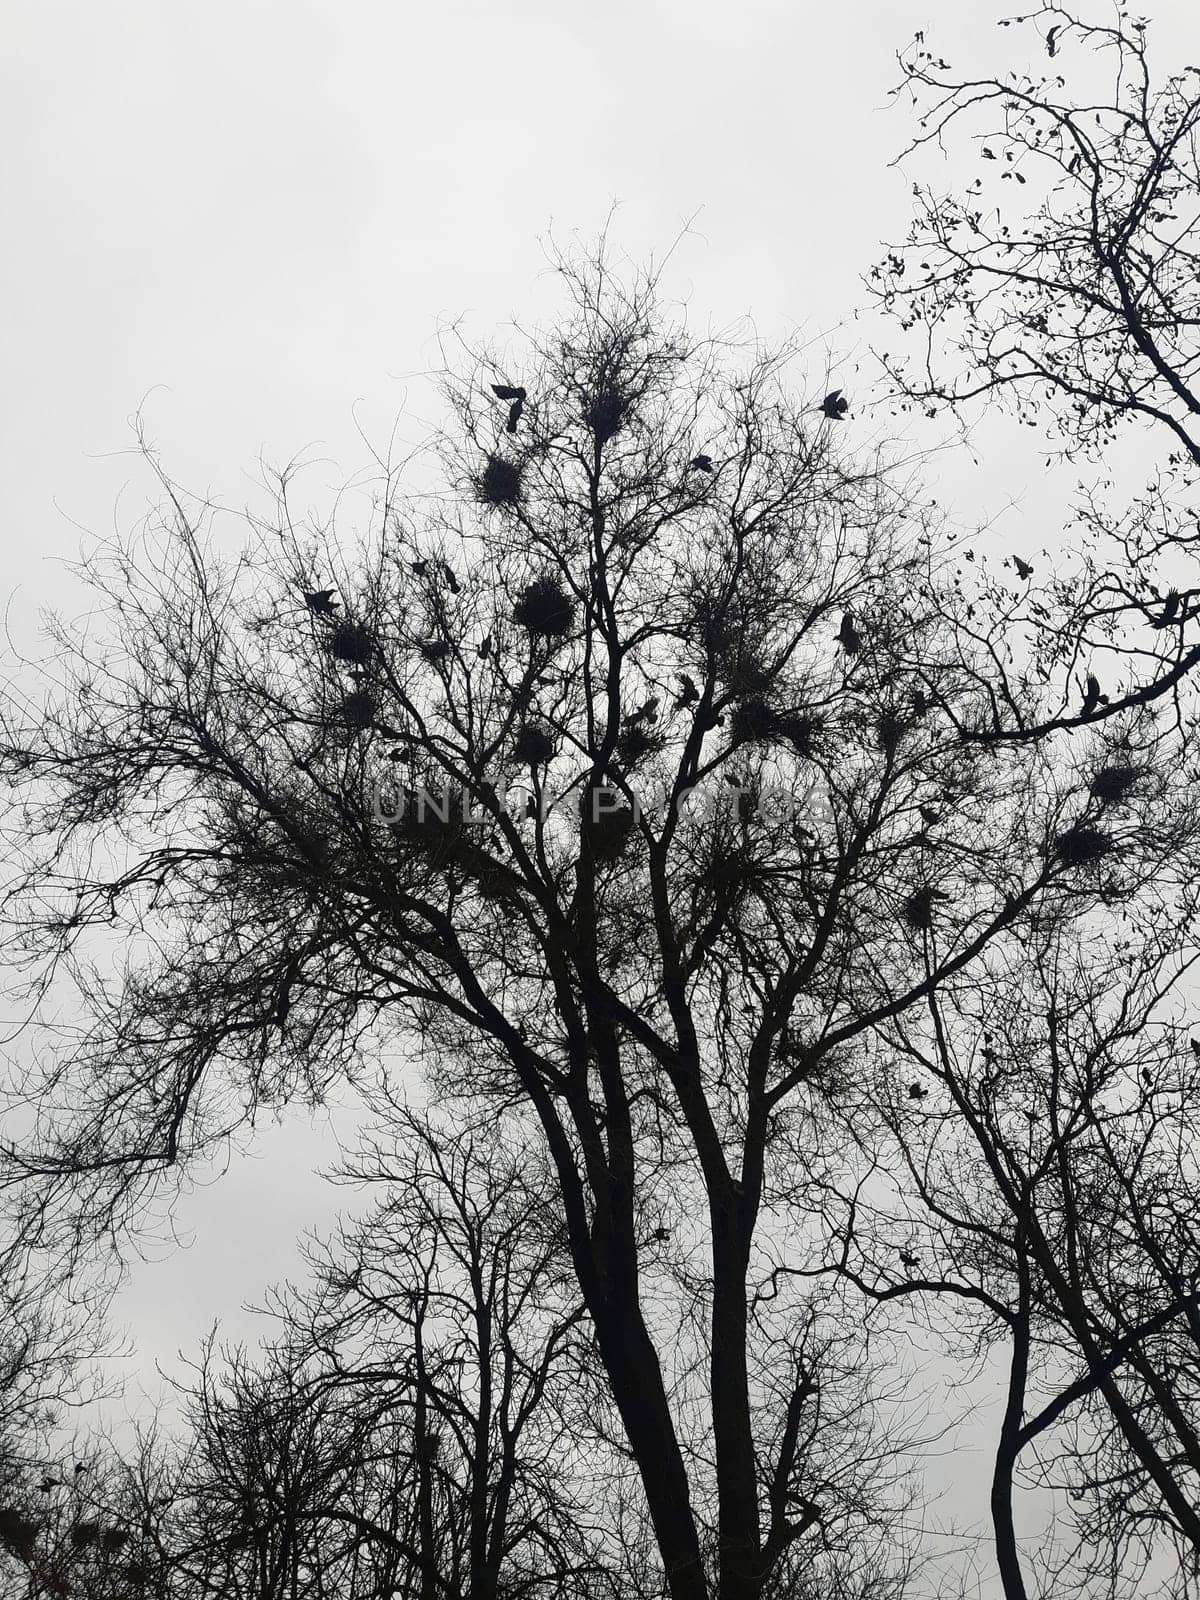 Crows nest on a tall tree by Endusik